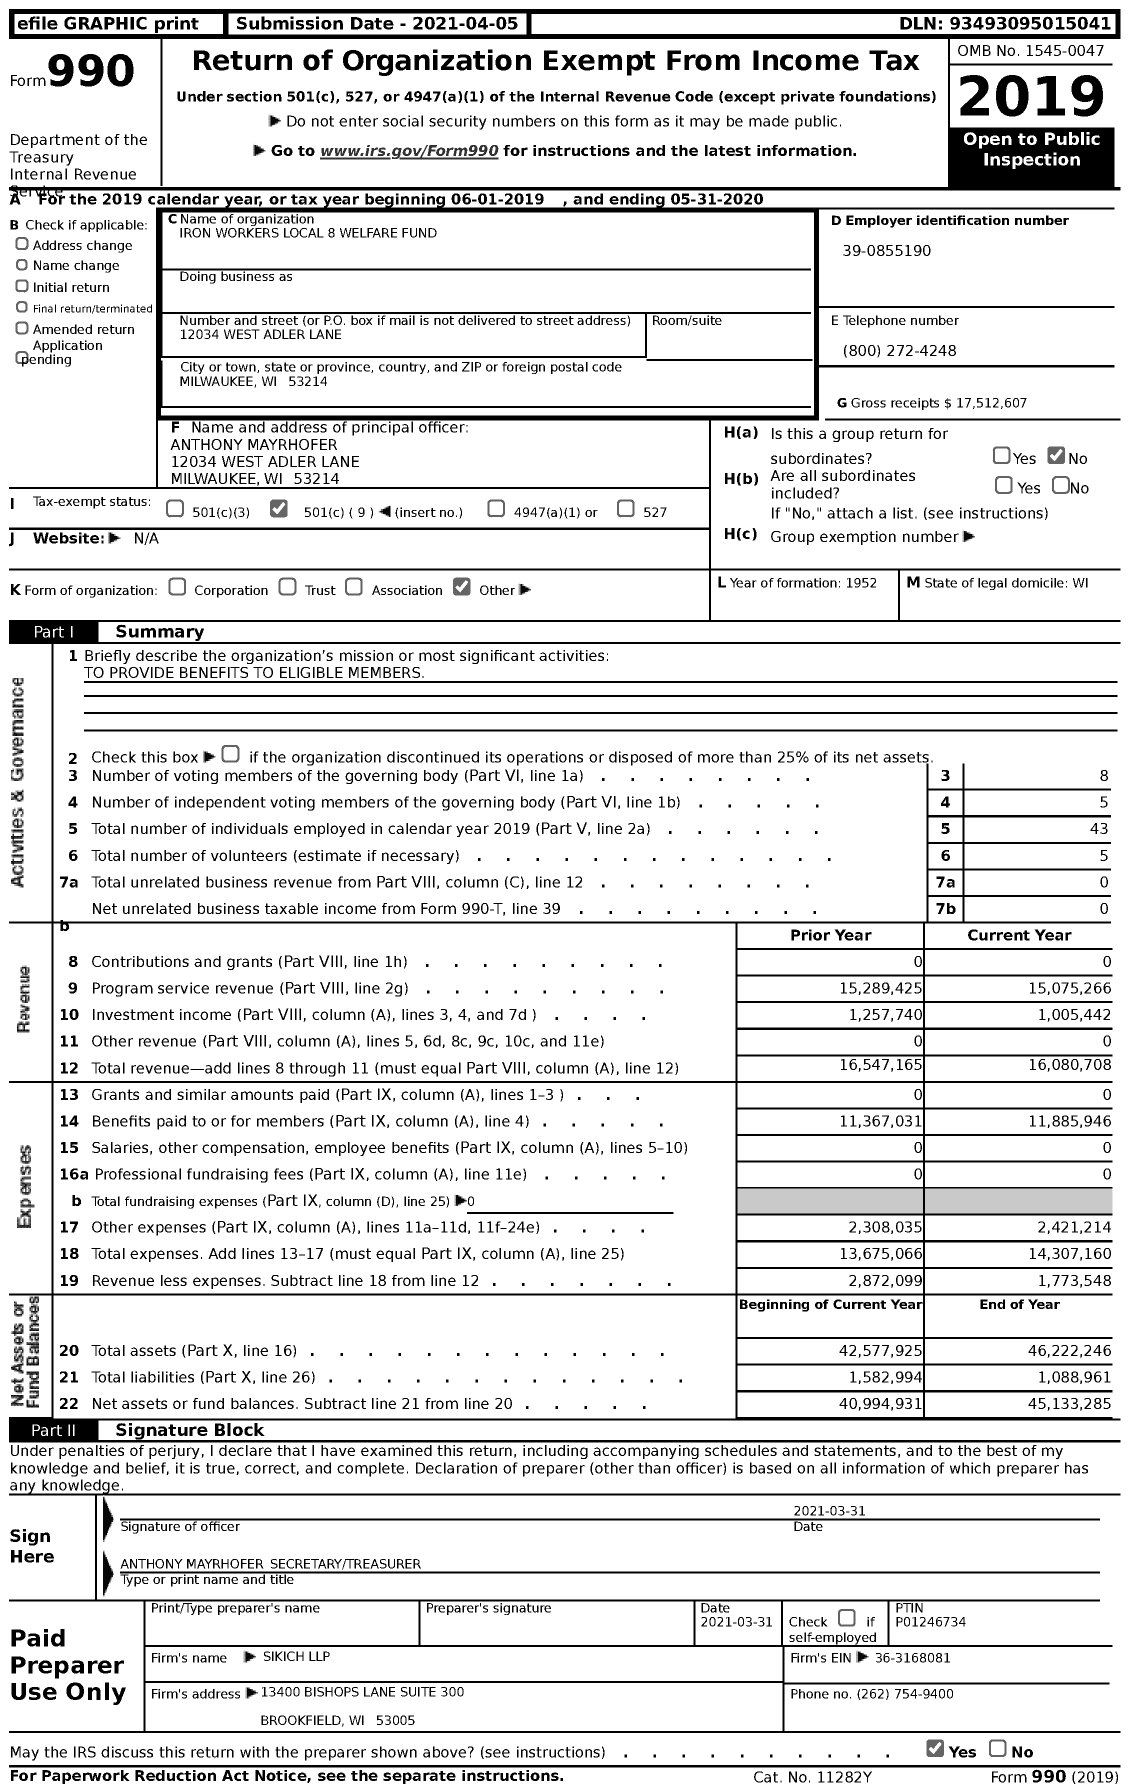 Image of first page of 2019 Form 990 for Iron Workers Local 8 Welfare Fund